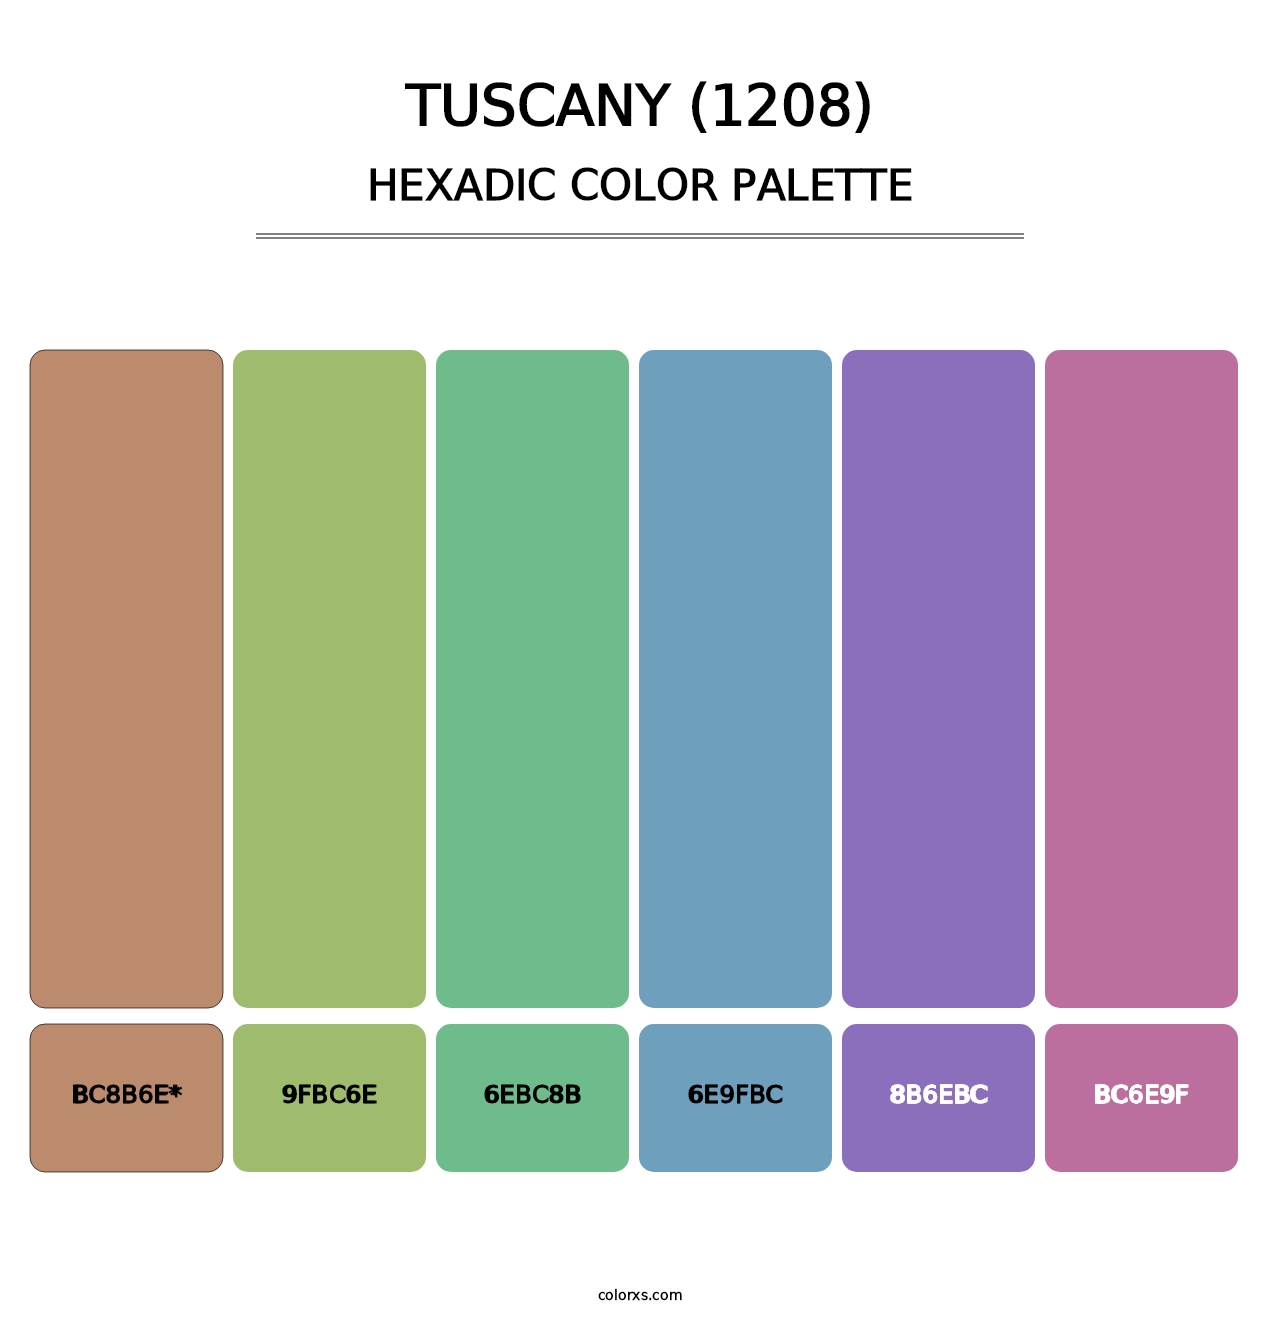 Tuscany (1208) - Hexadic Color Palette